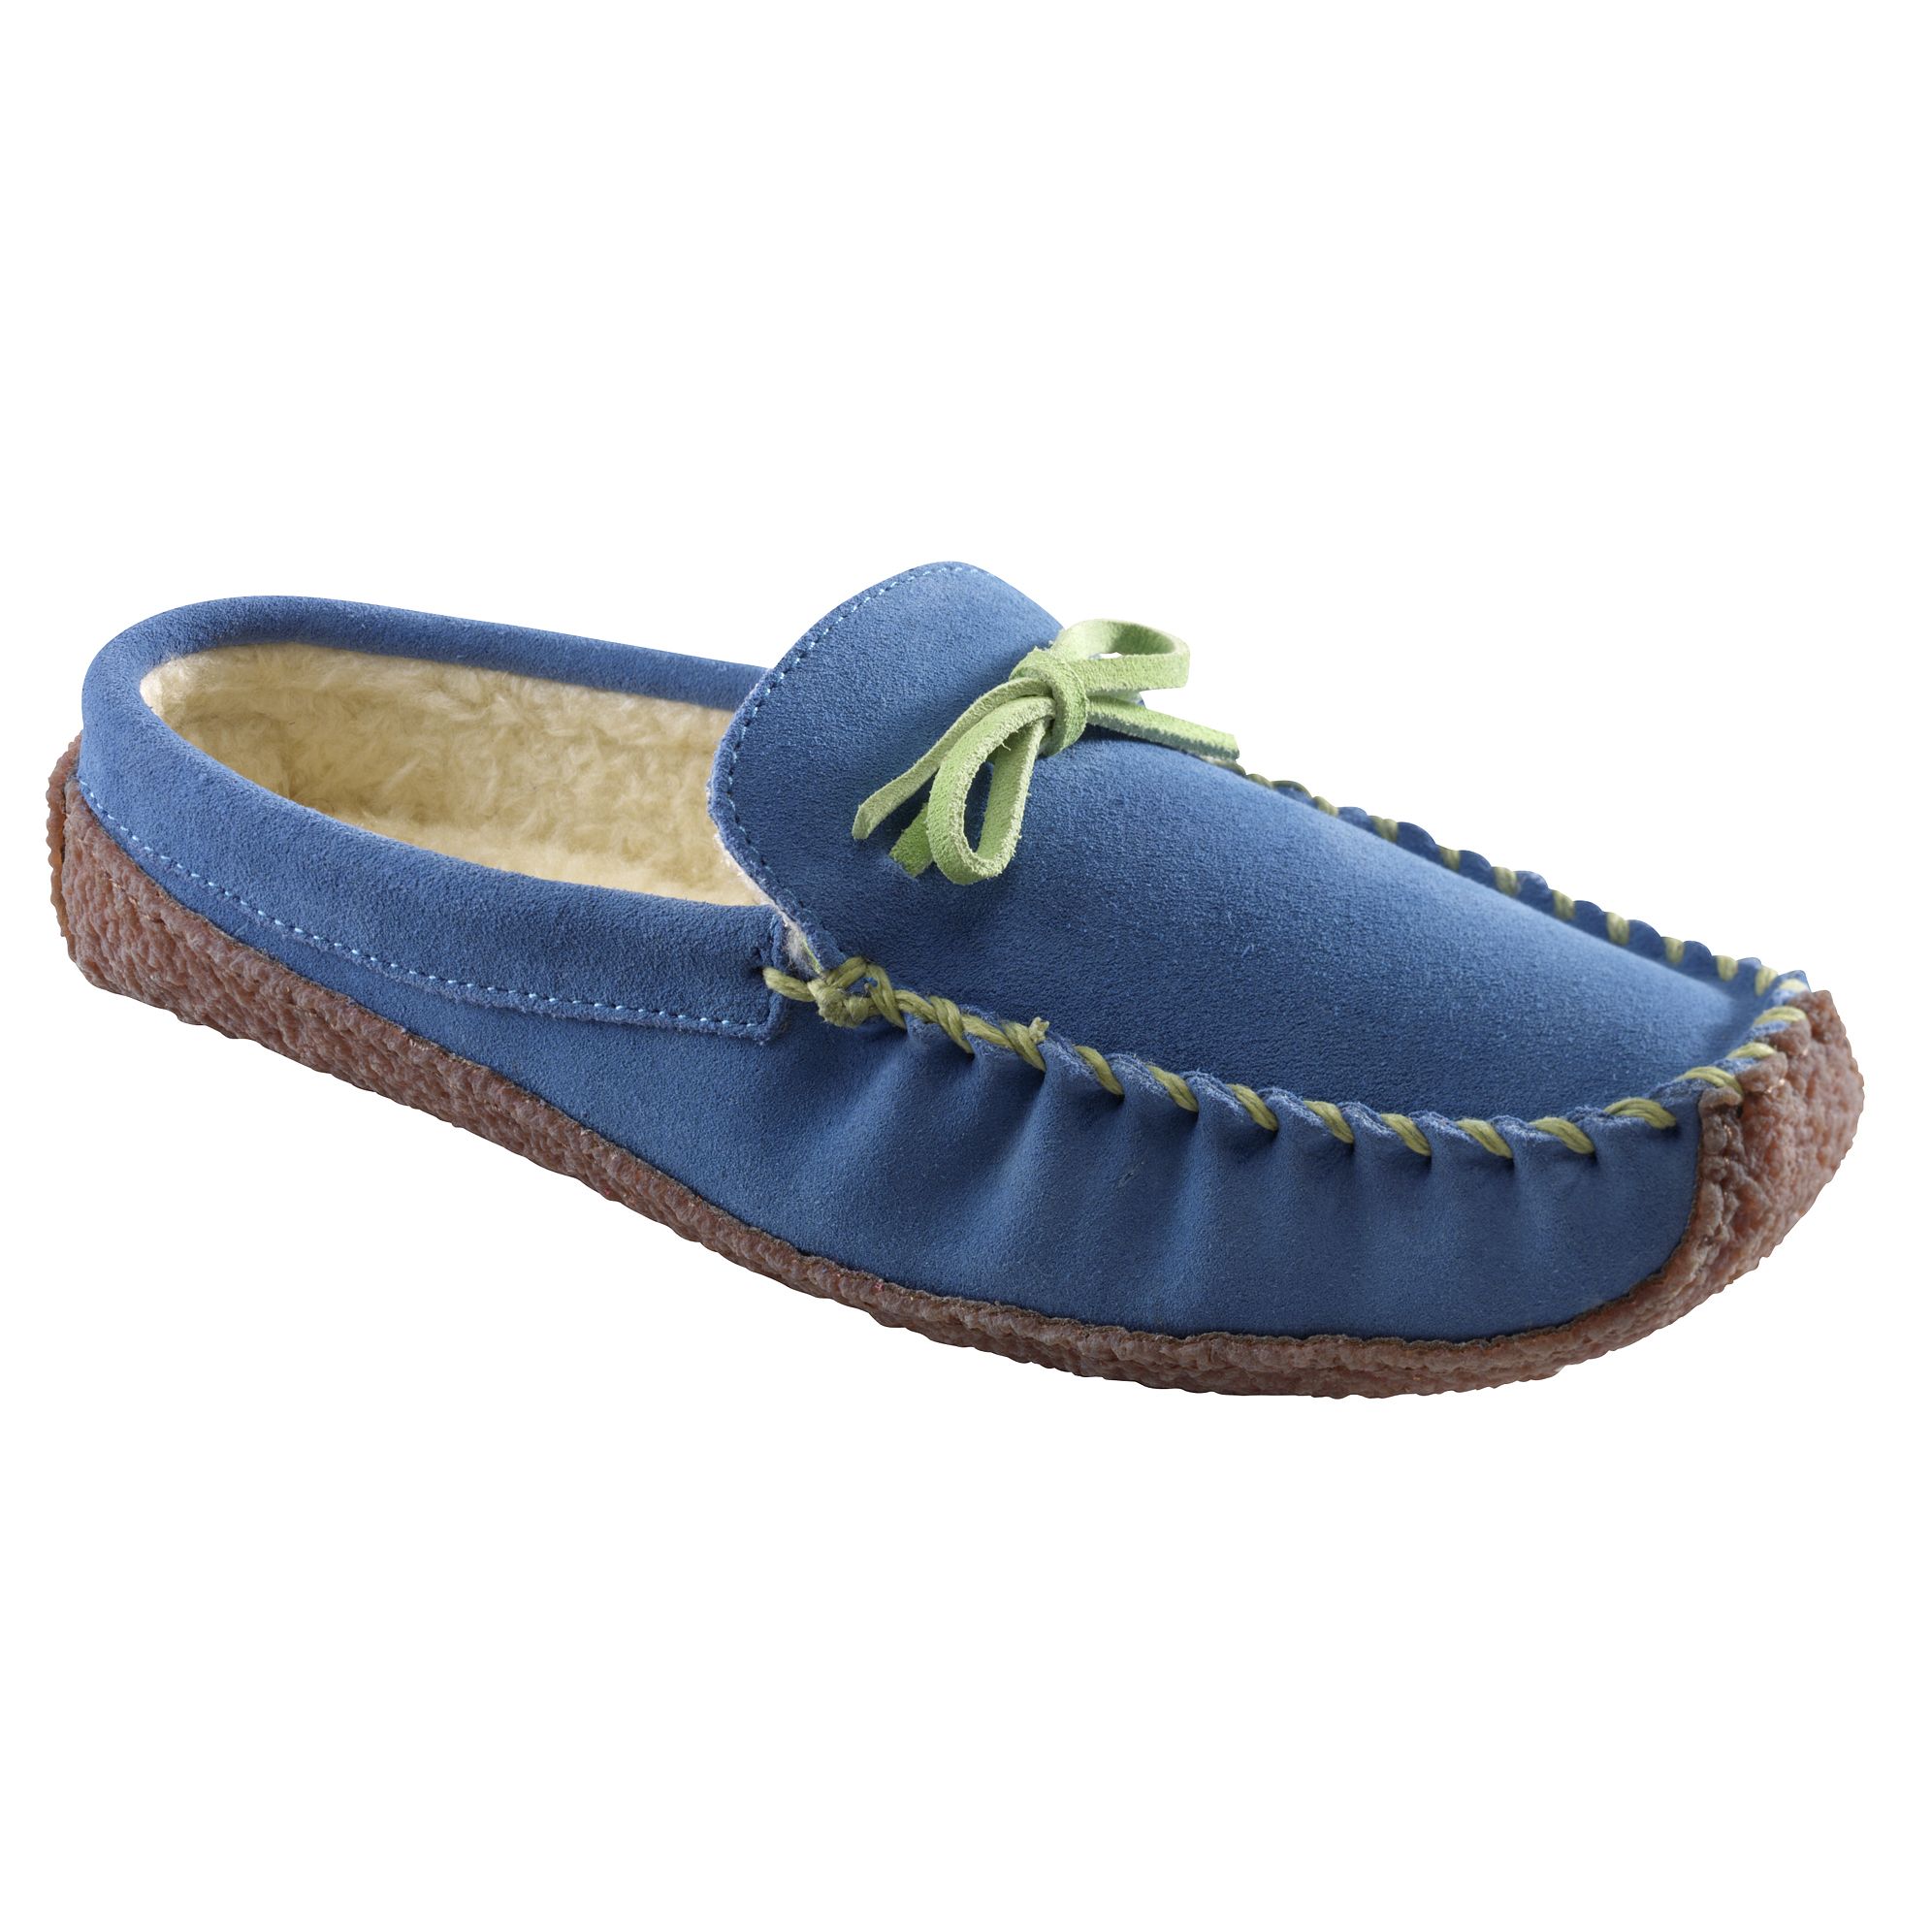 Lands' End Womens Suede Mule Slippers